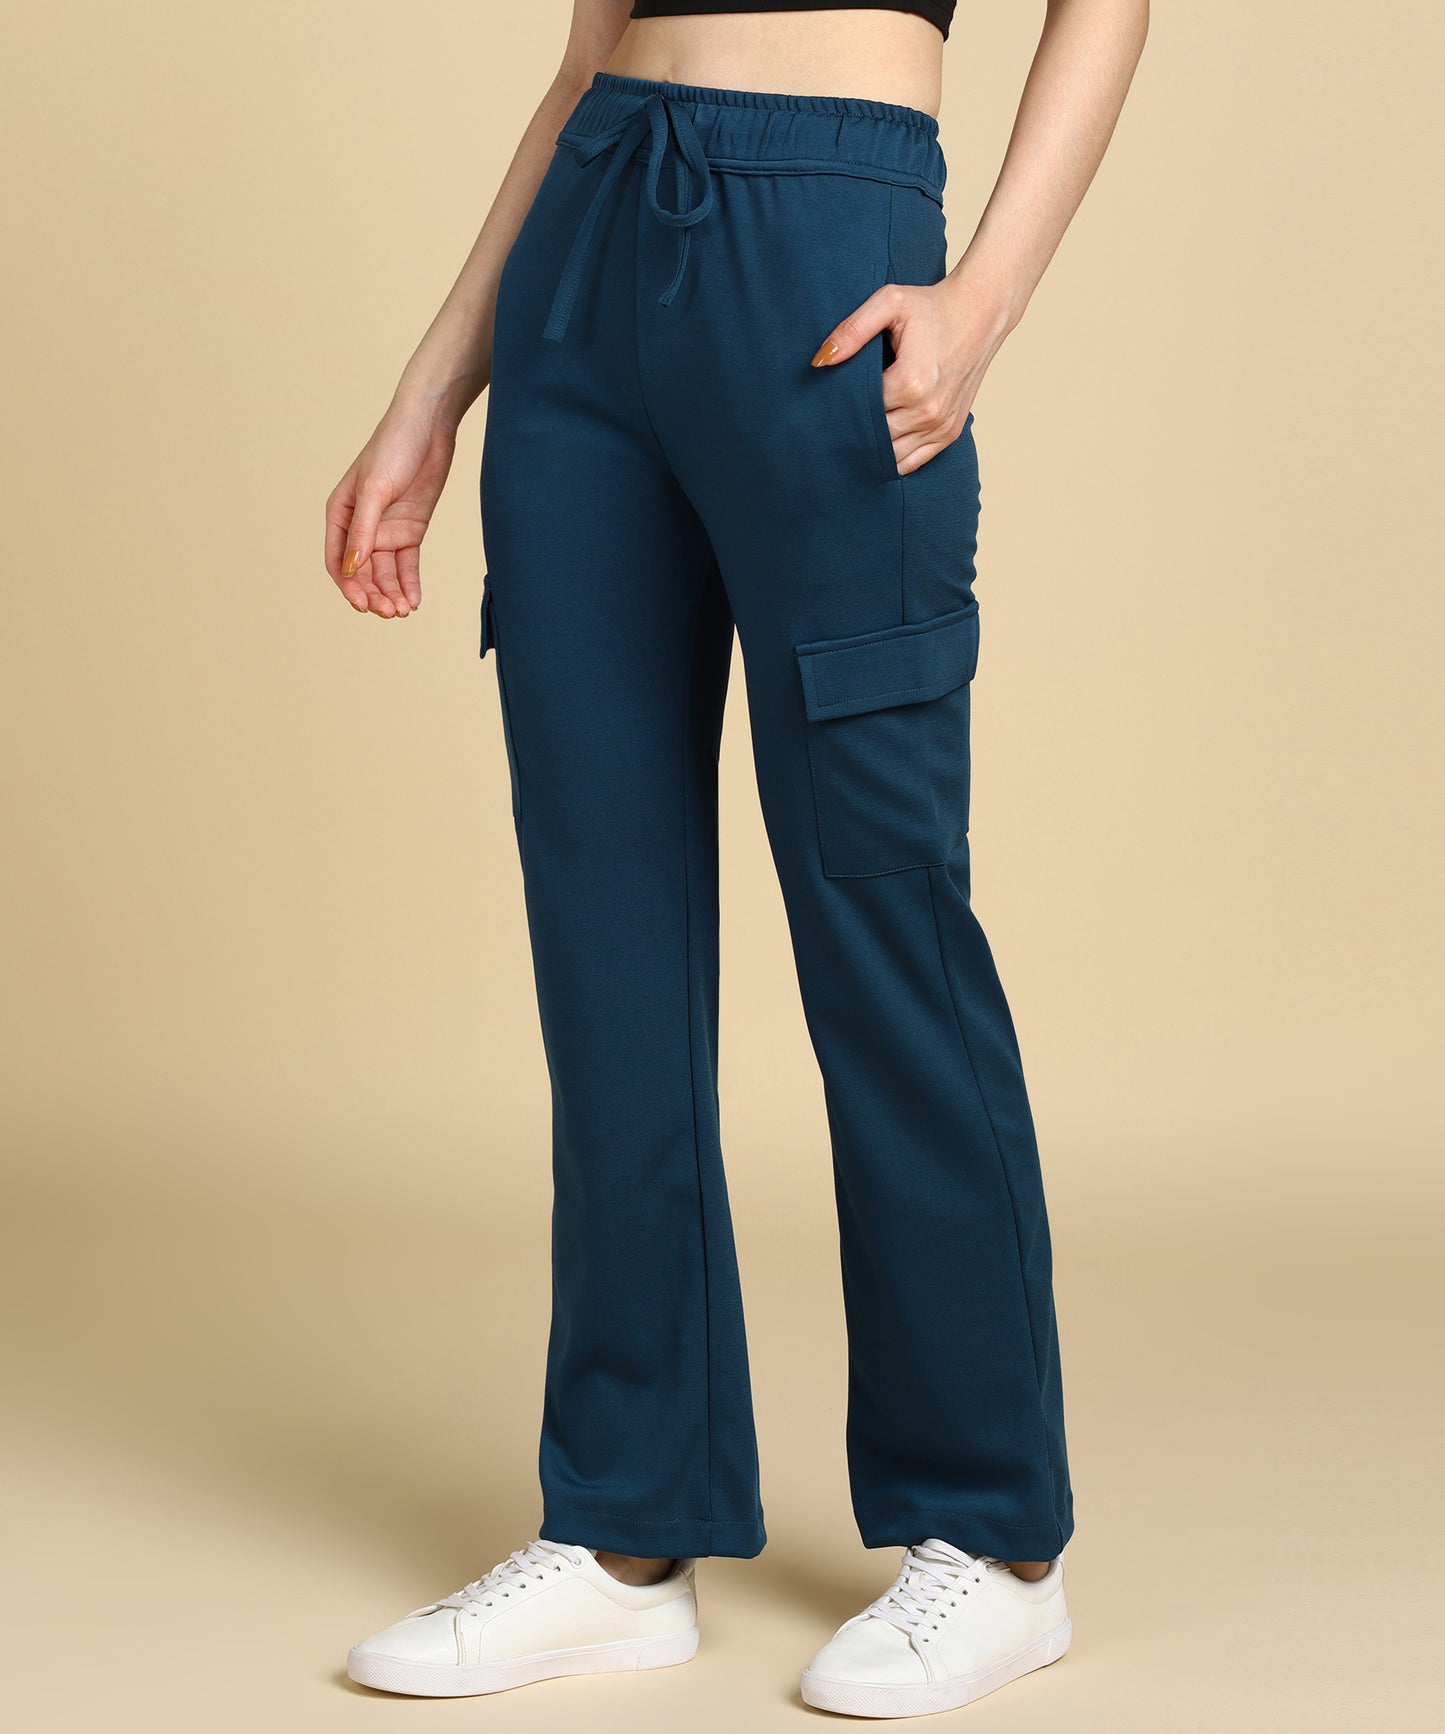 Teal Blue Casual High - Waisted Parallel Cargo Trouser Pants for Women - 699